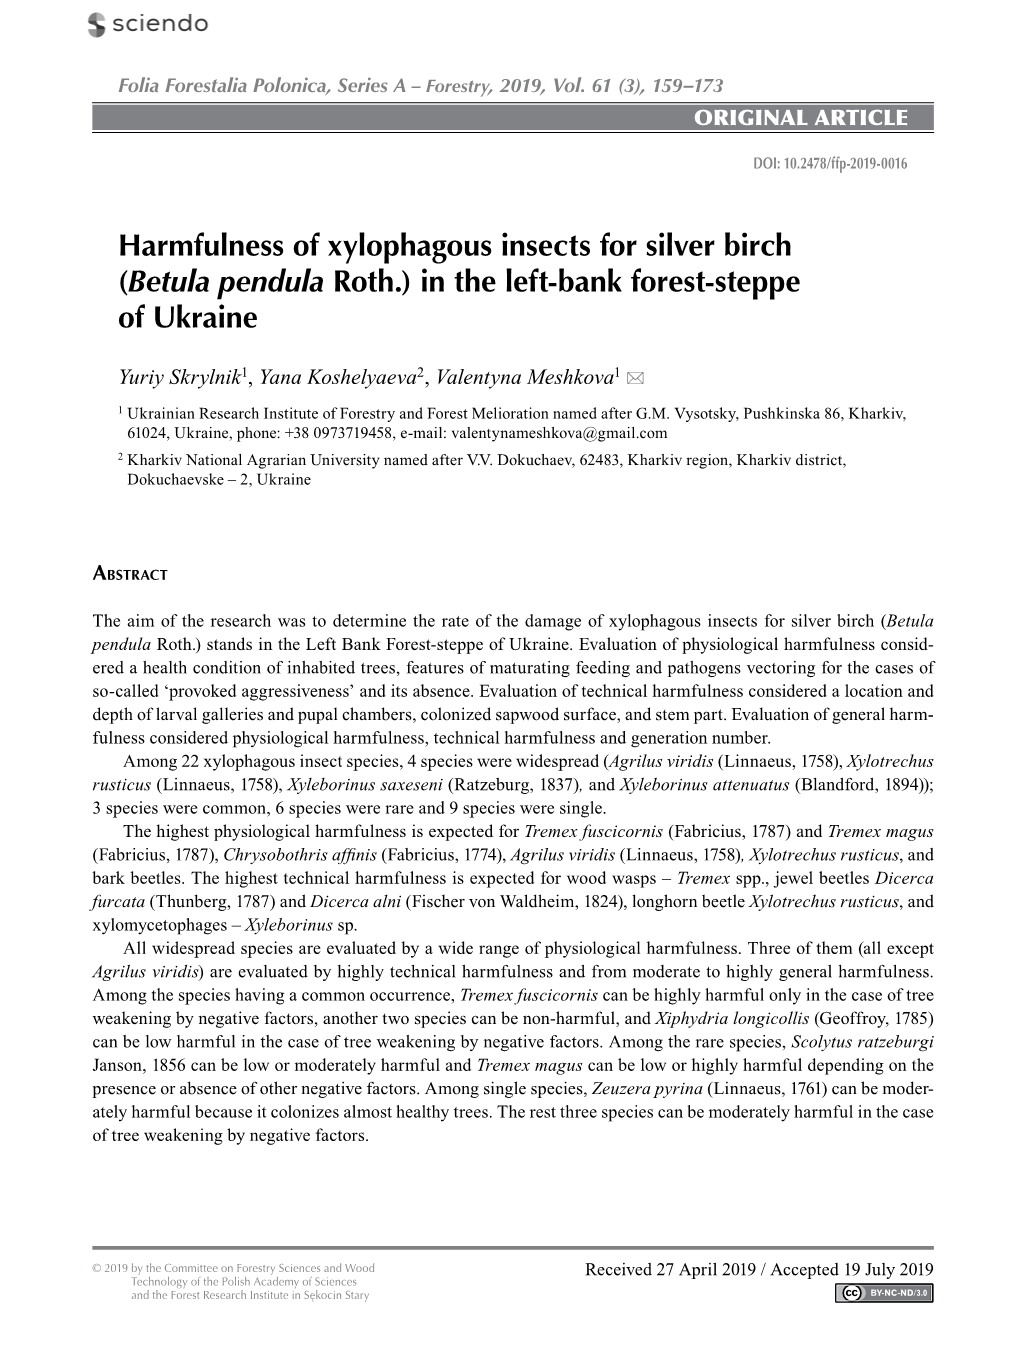 Harmfulness of Xylophagous Insects for Silver Birch (Betula Pendula Roth.) in the Left-Bank Forest-Steppe of Ukraine